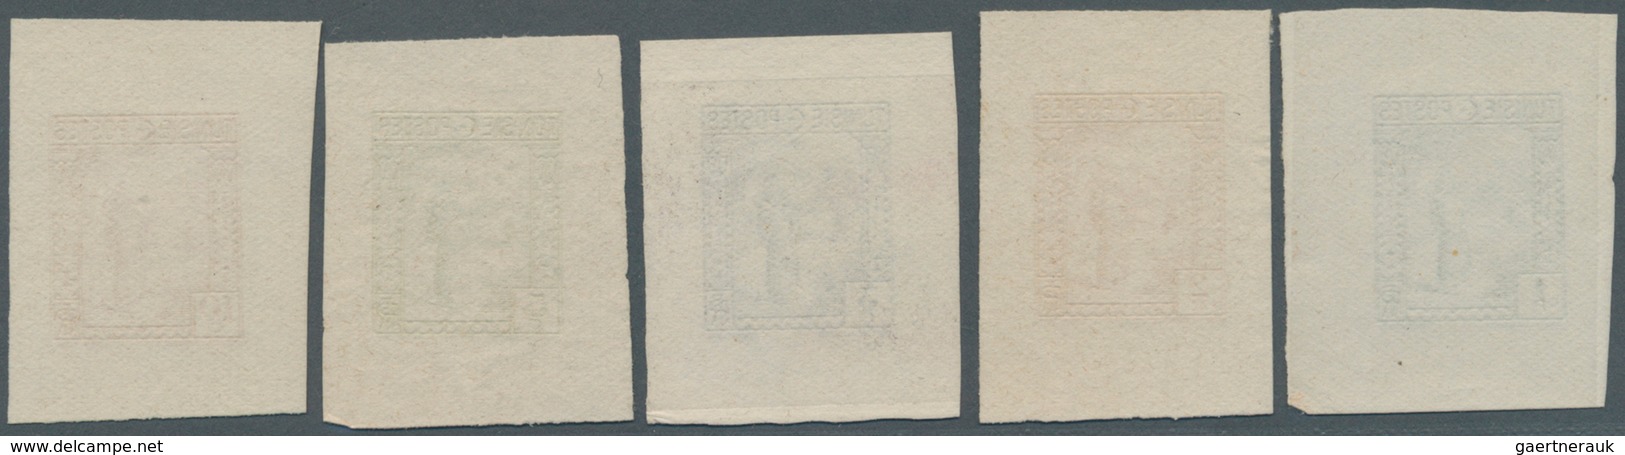 Tunesien: 1931, Definitives "Views Of Morocco", 1c. To 10c. "Local Woman With Water Bin", Five Singl - Lettres & Documents